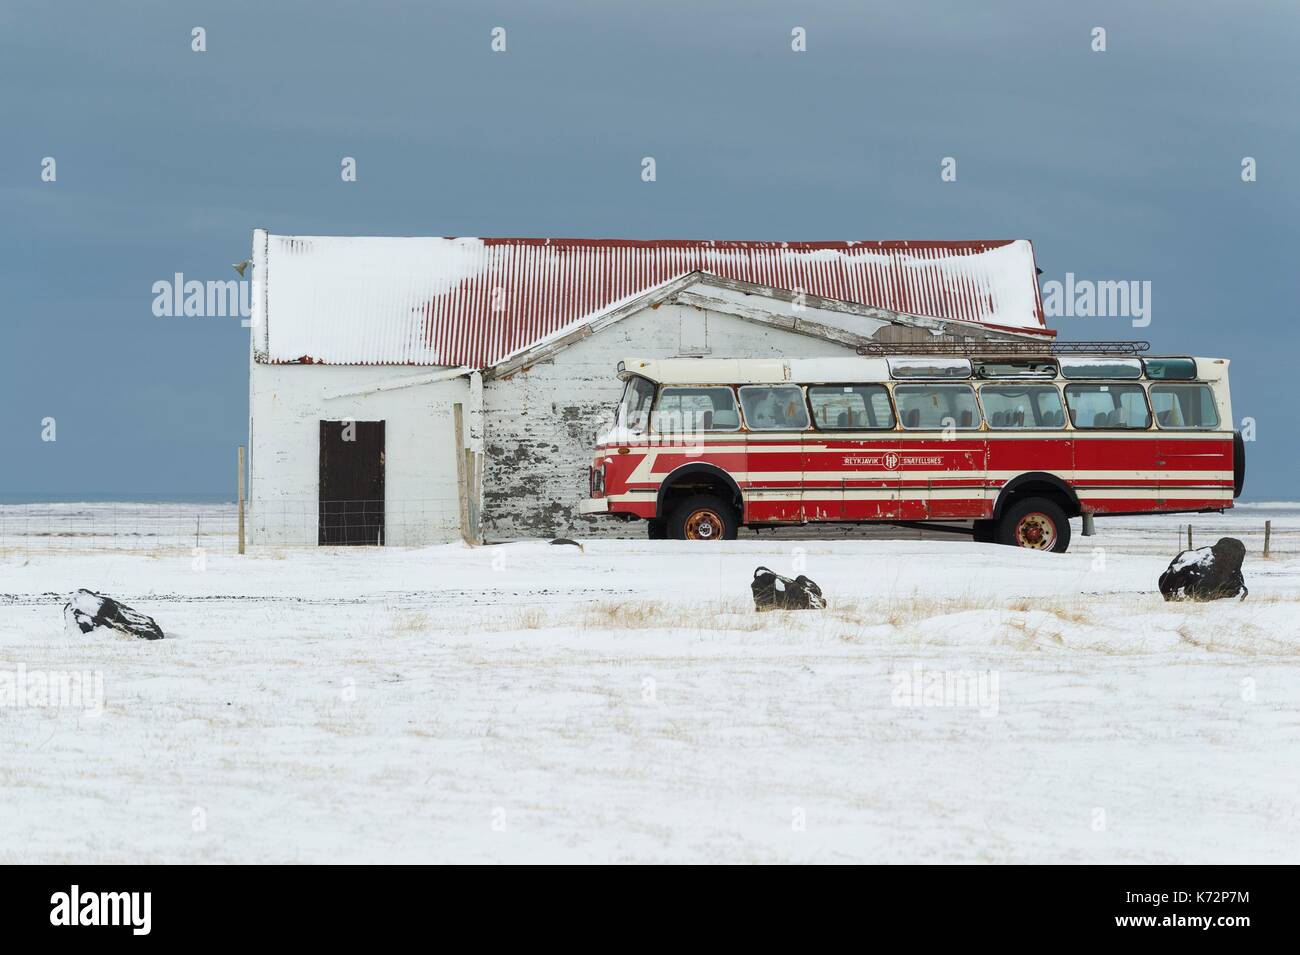 Iceland, West Iceland, Snaefellsnes Peninsula, old bus in front of a building Stock Photo